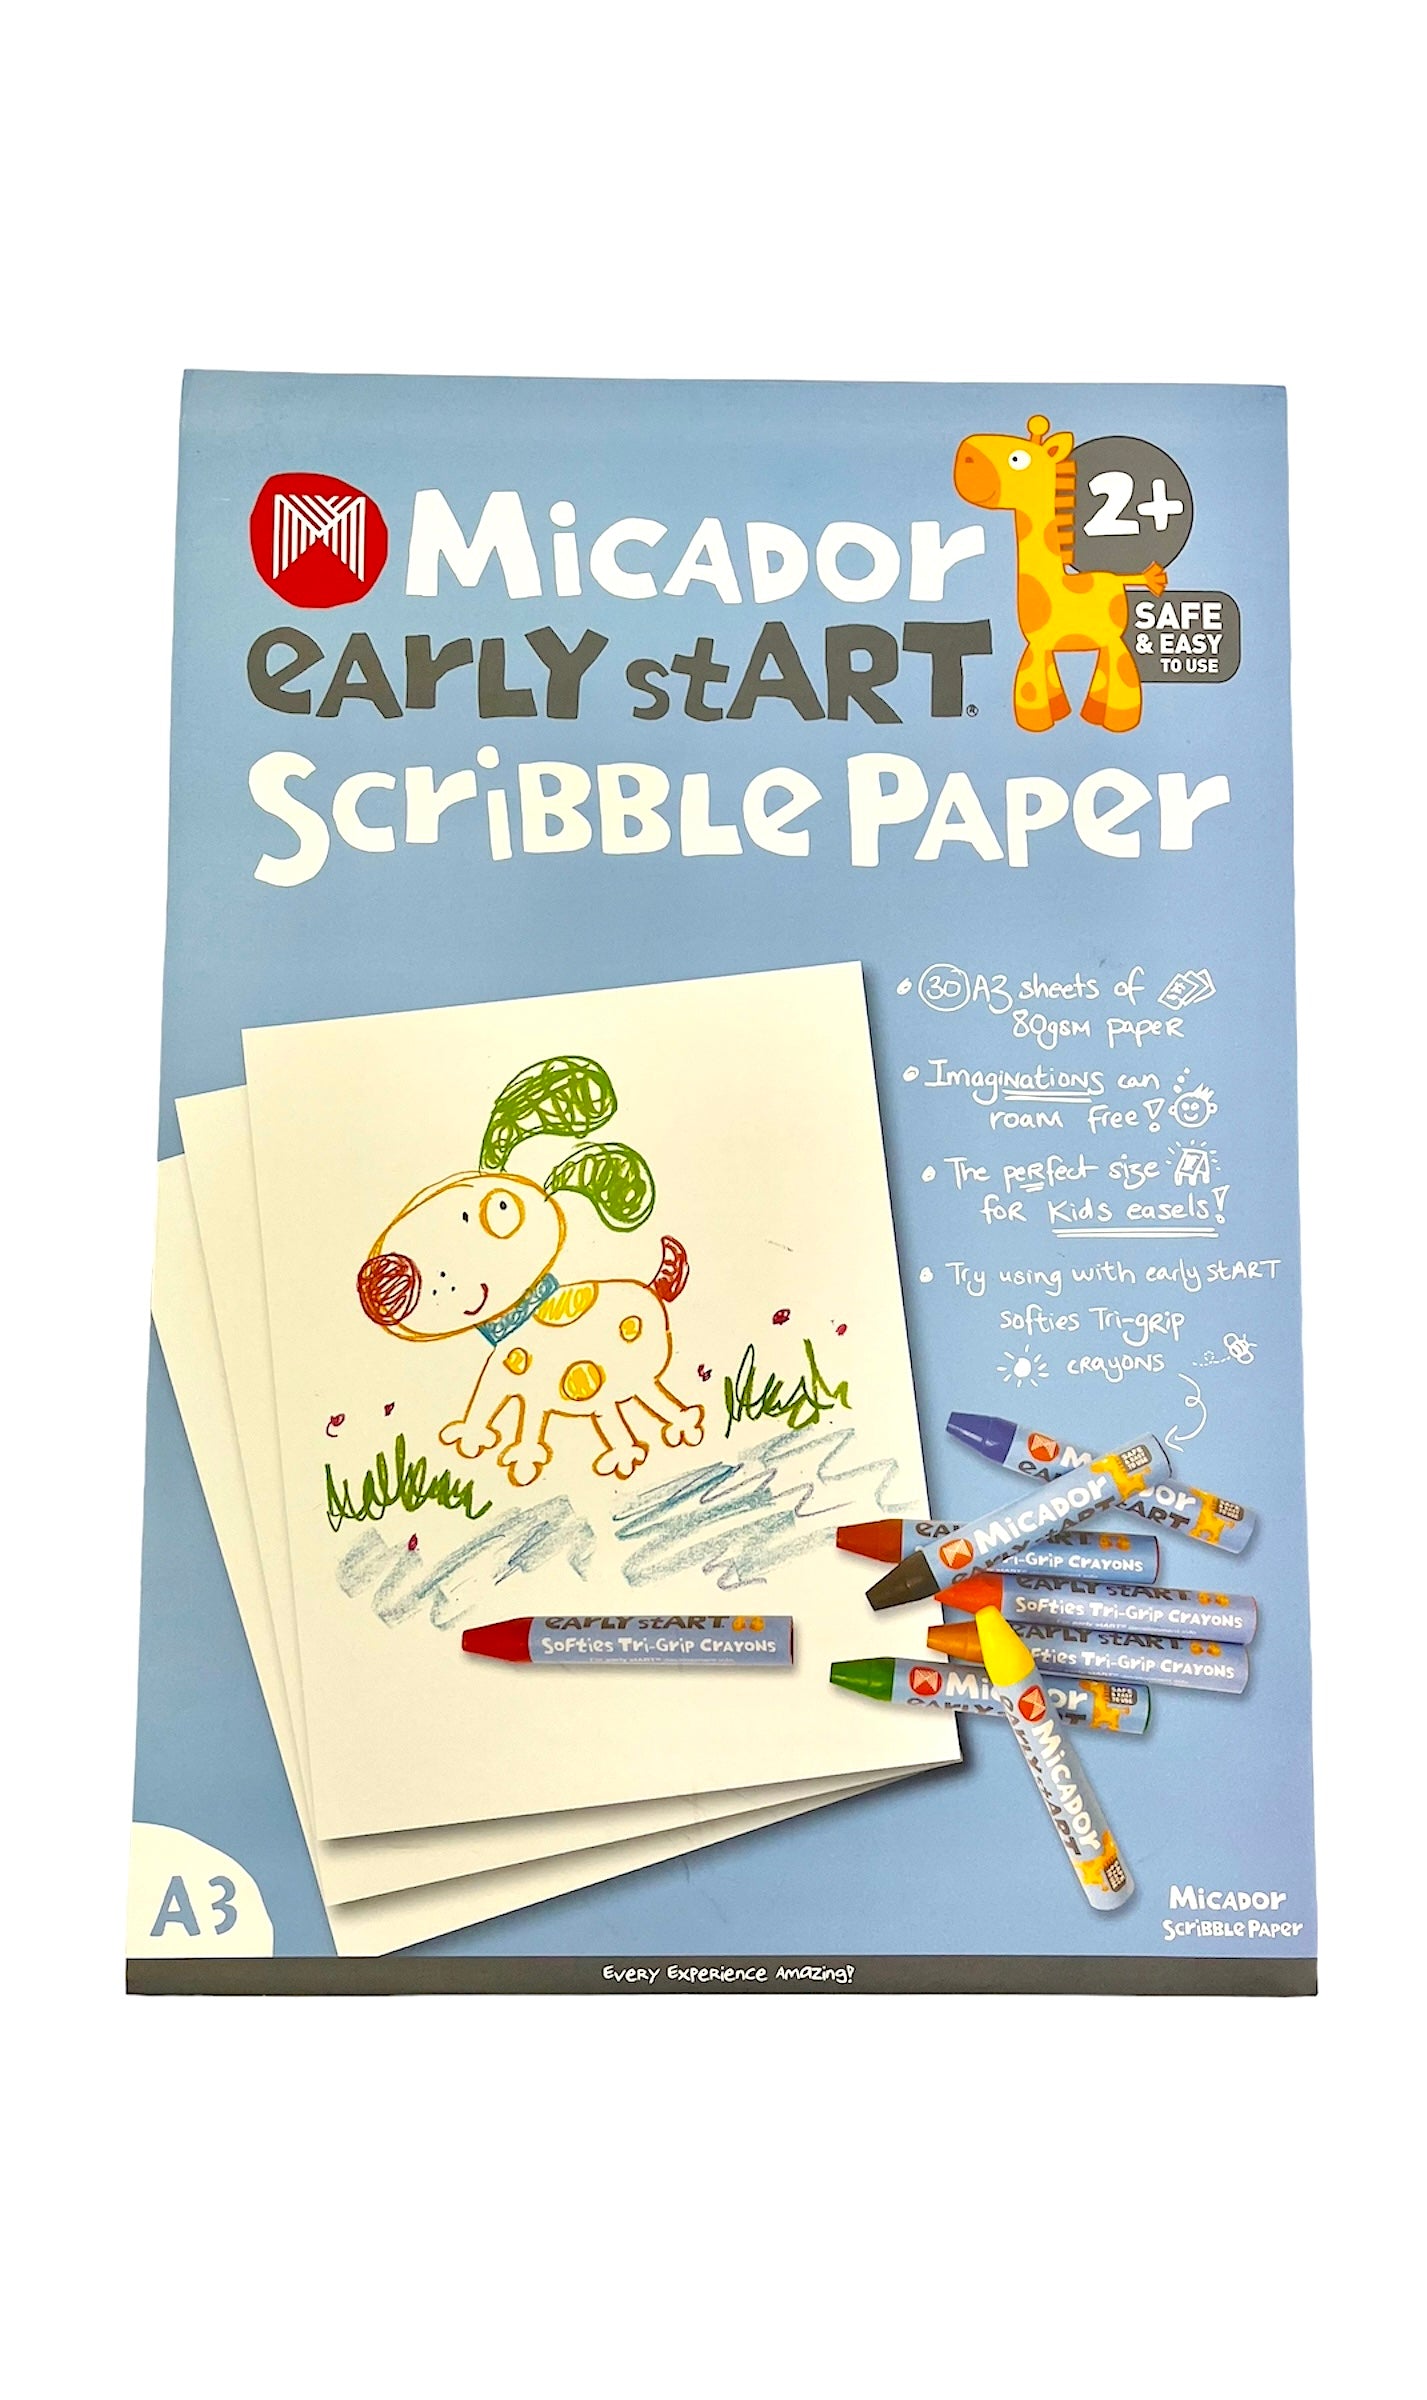 Micador Early Start A3 Scribble Paper - 30 Sheets